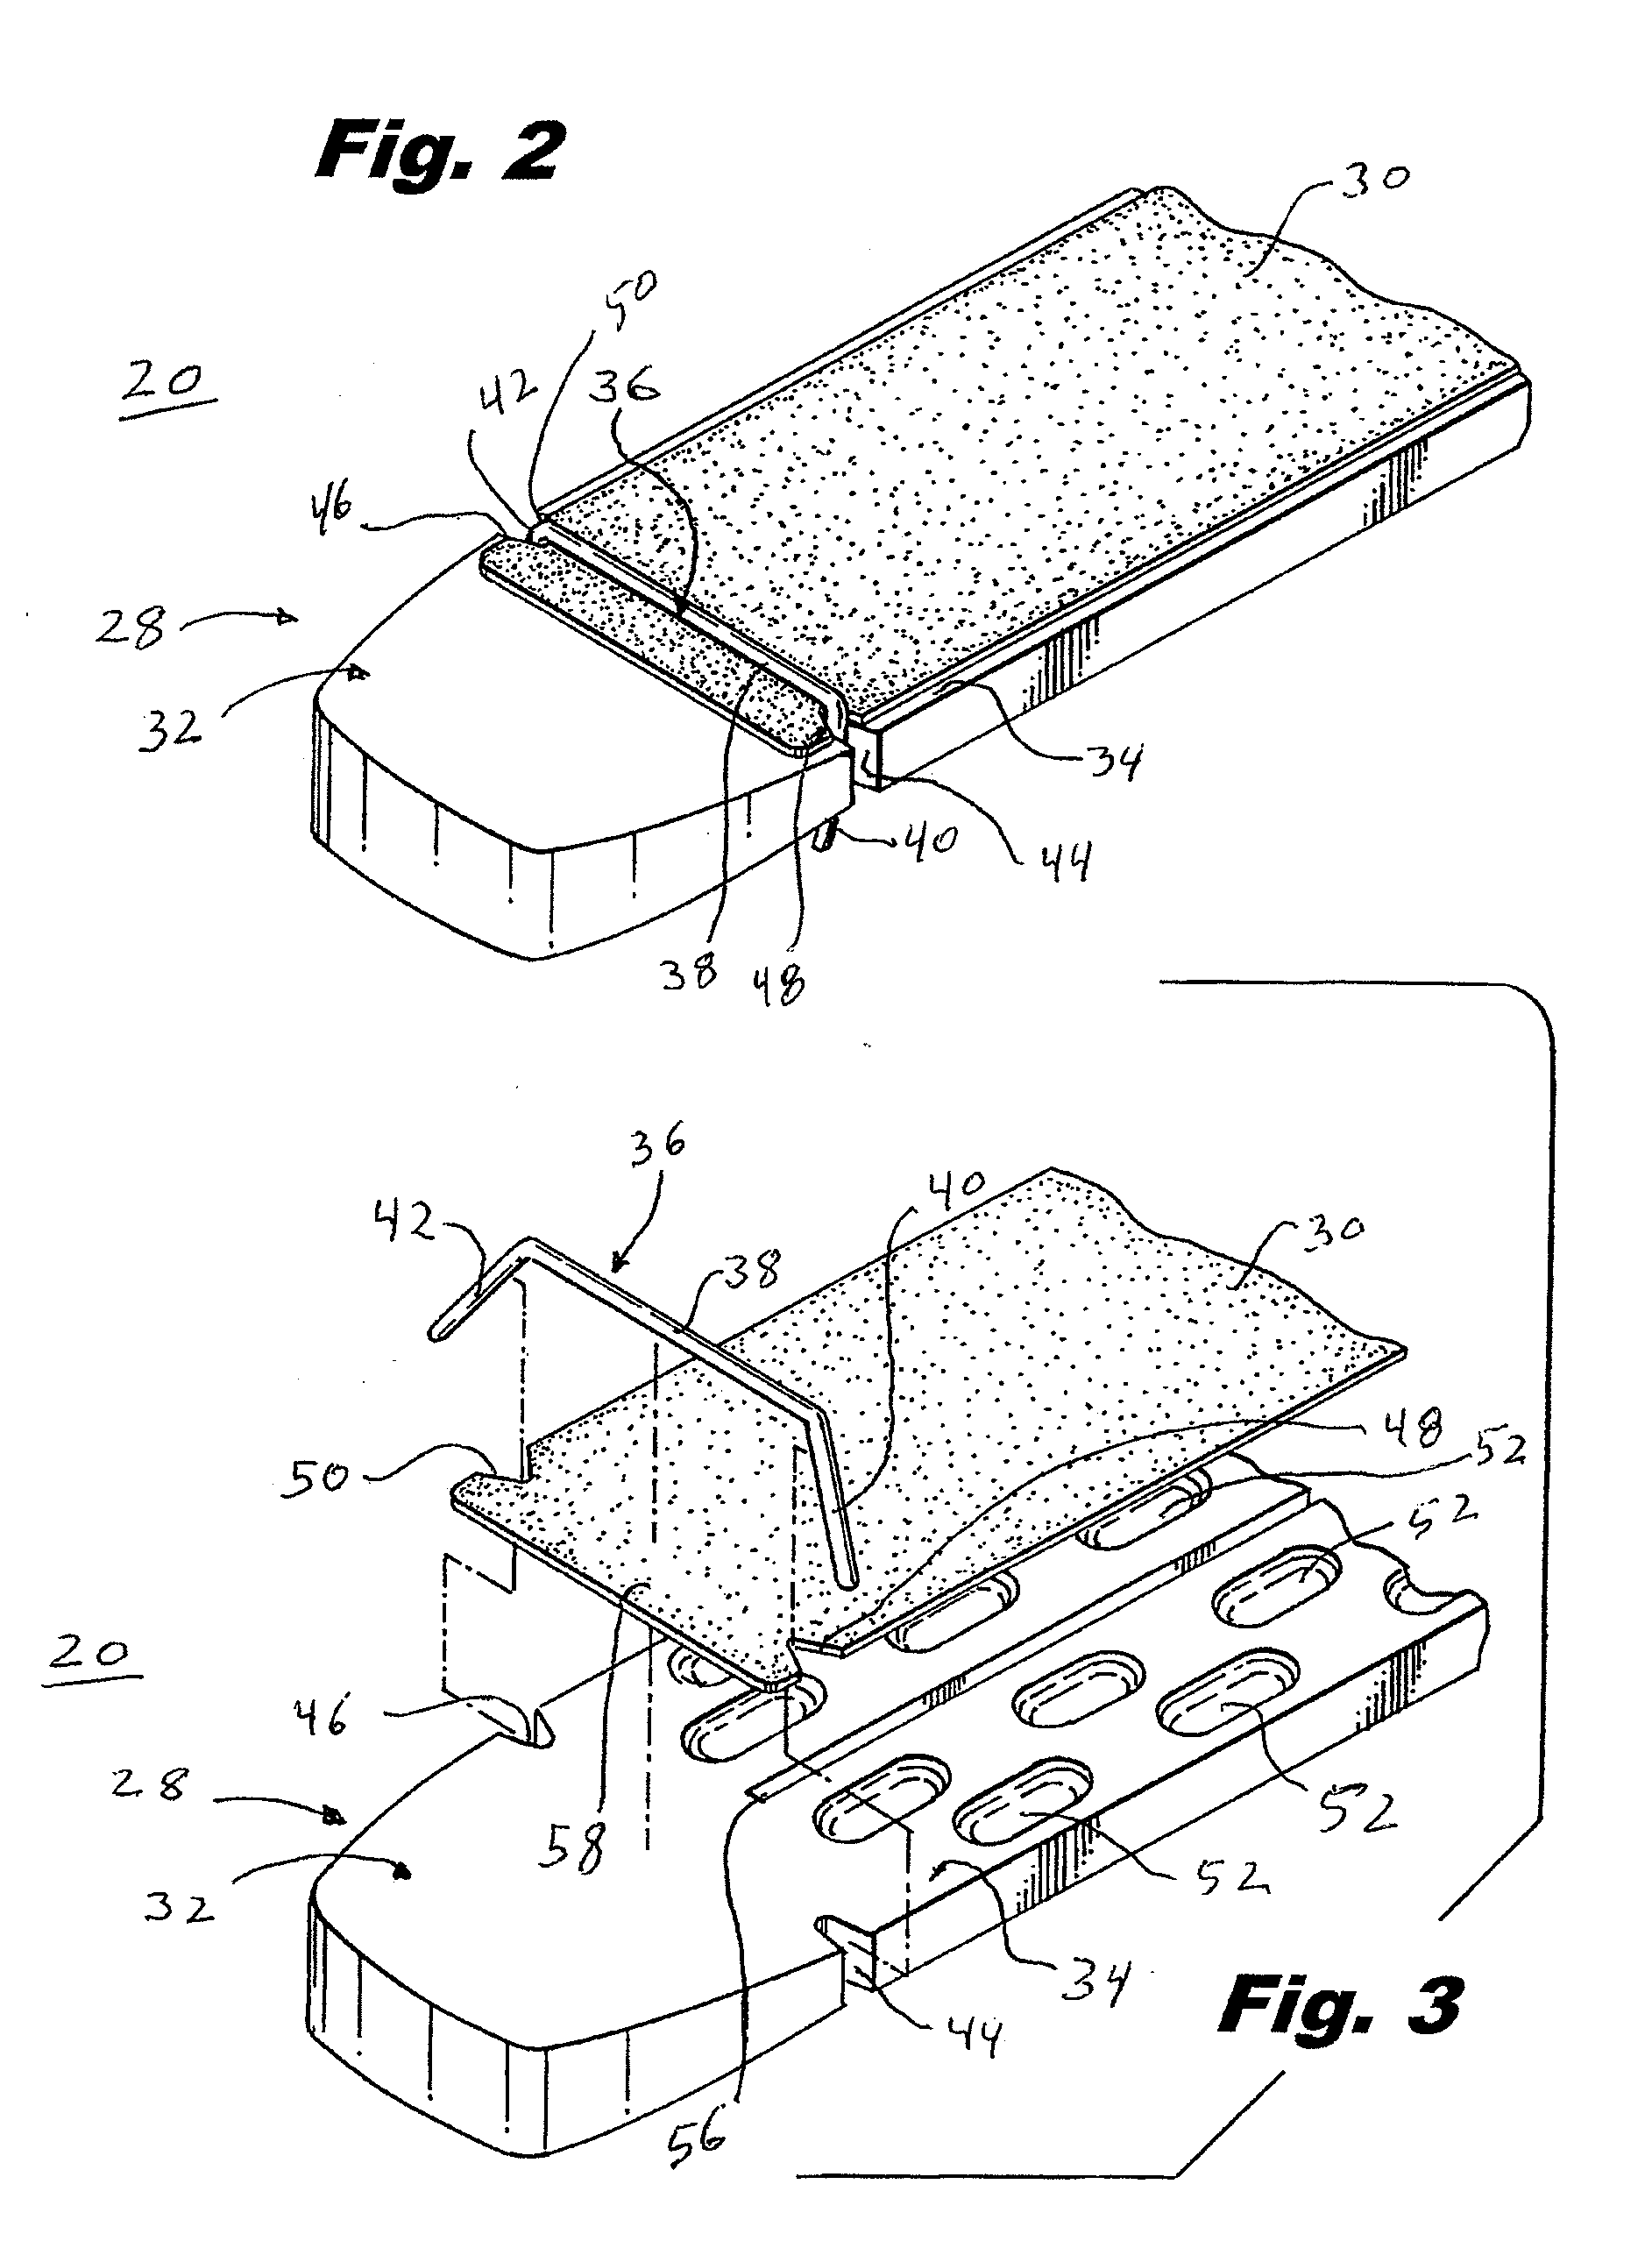 Crimp And Release Of Suture Holding Buttress Material